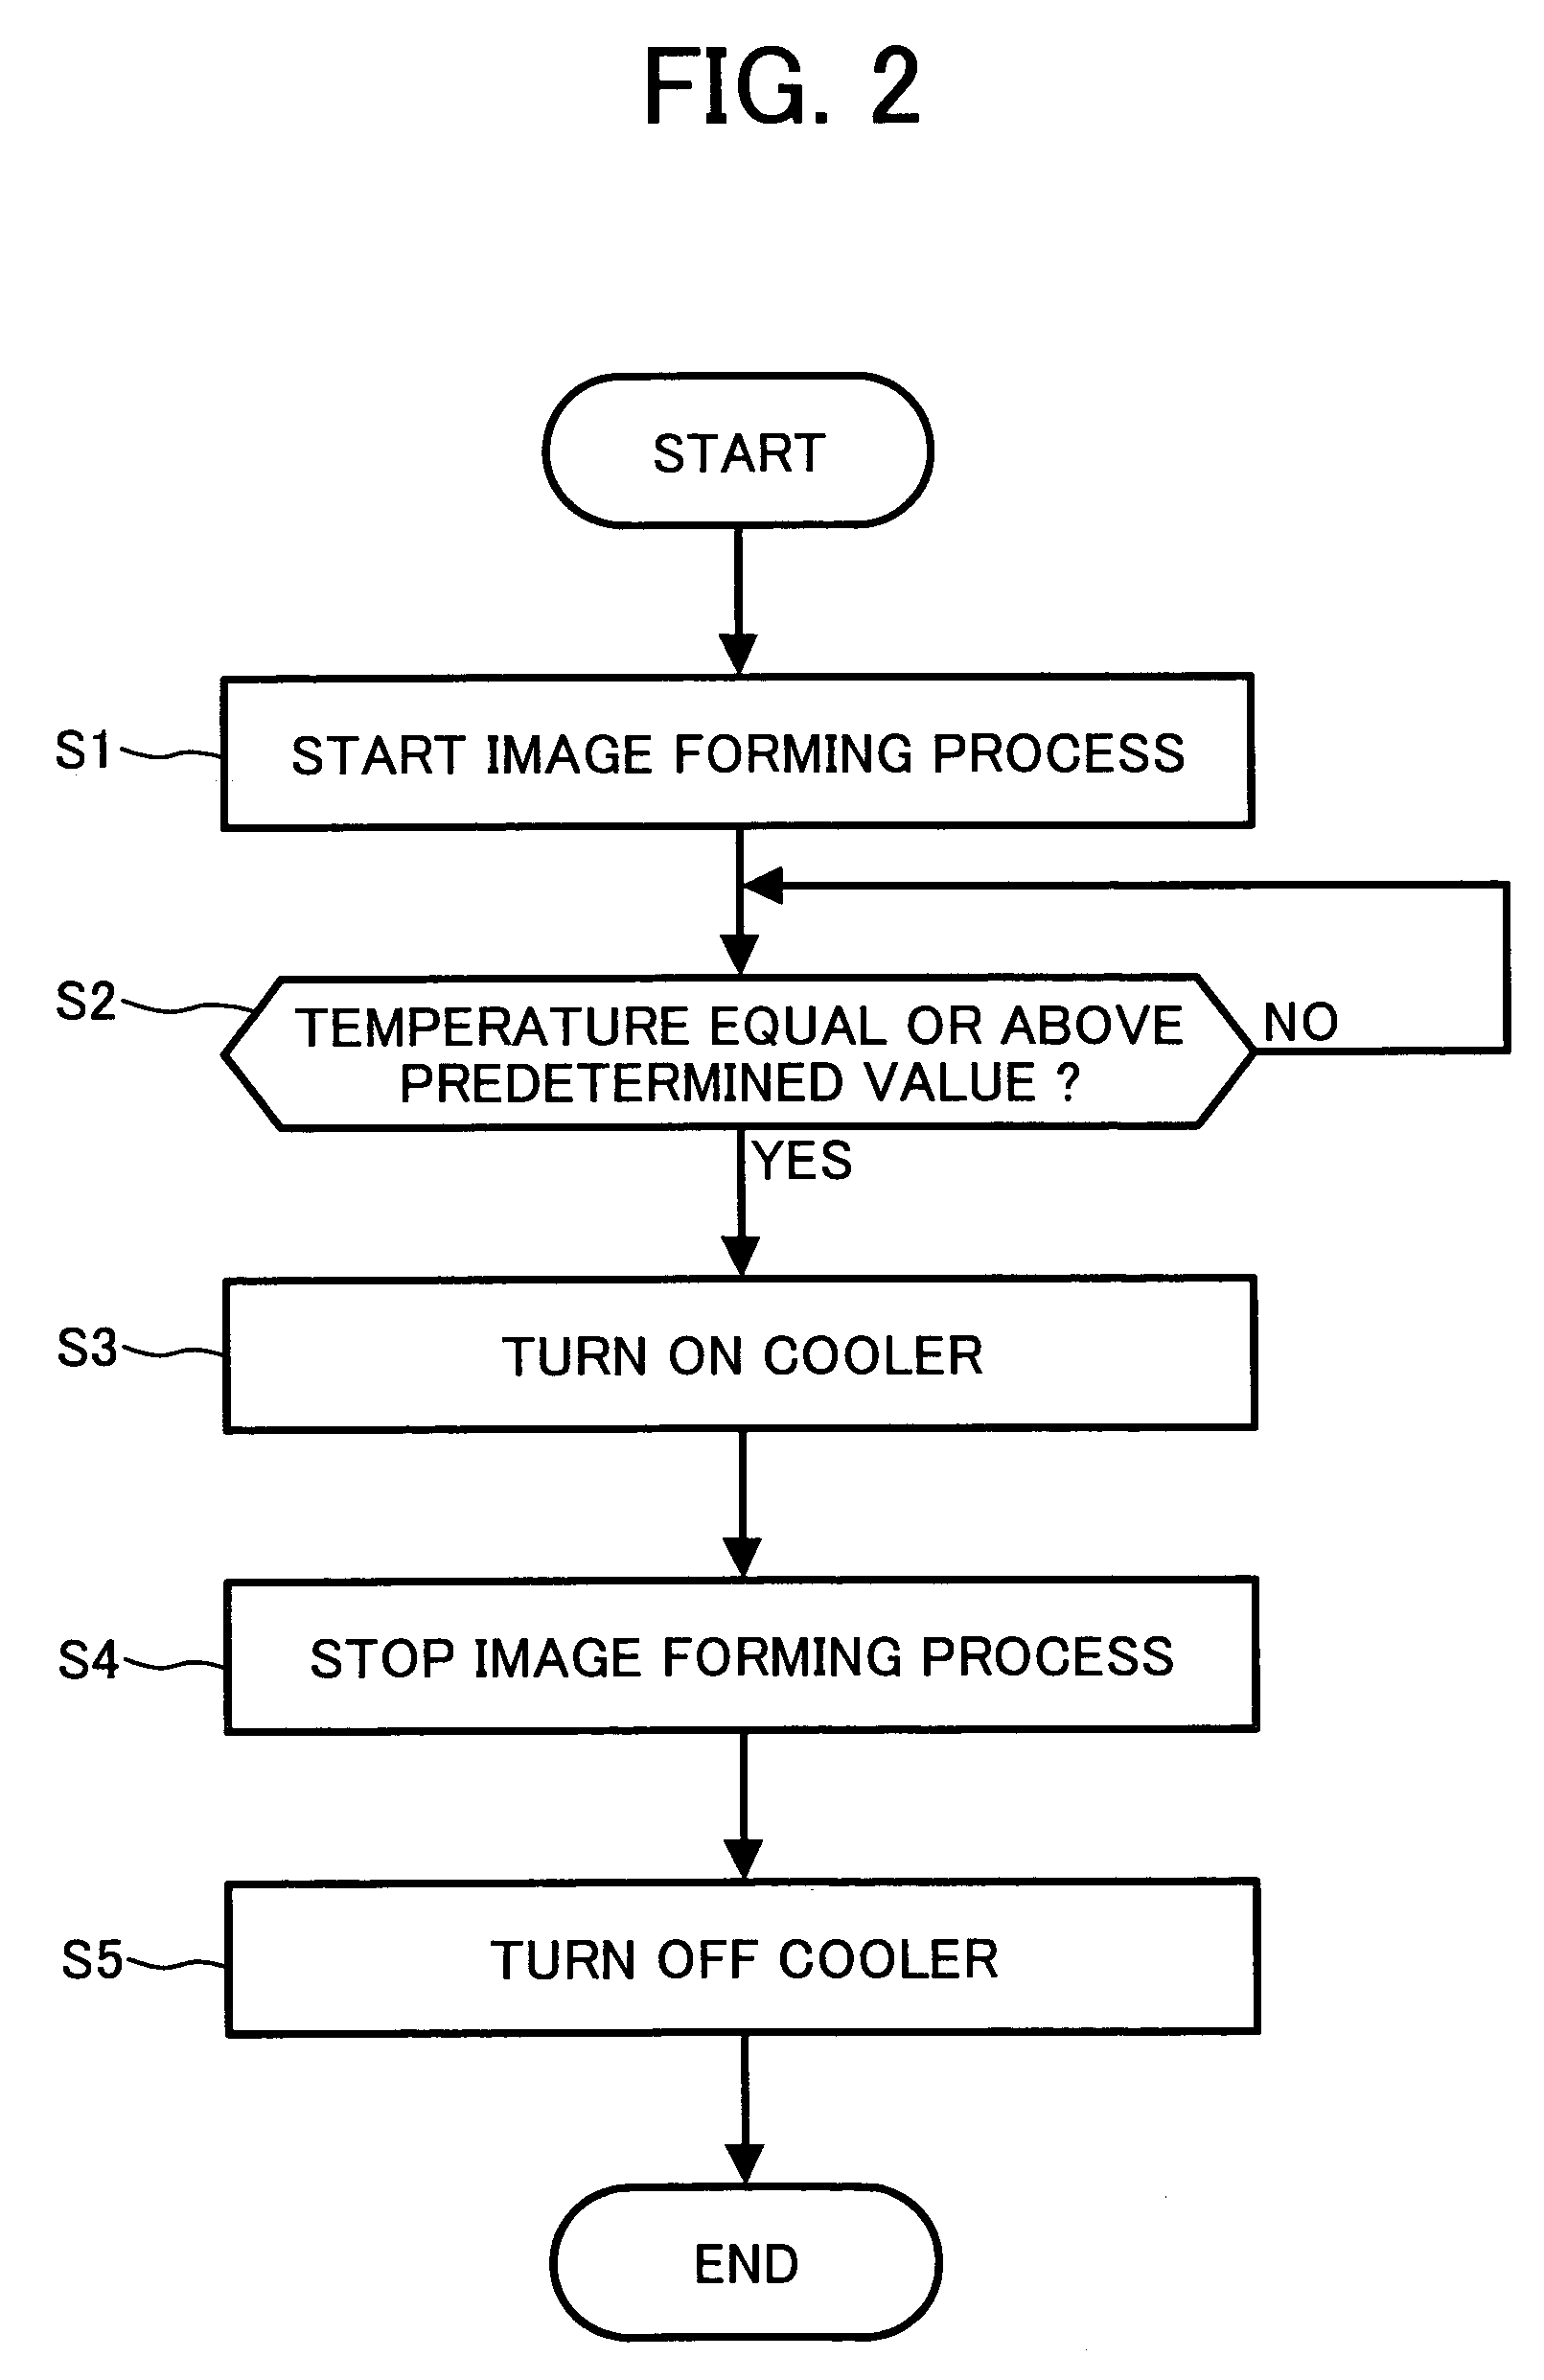 Apparatus and method for image forming capable of performing an improved image fixing using a cooler